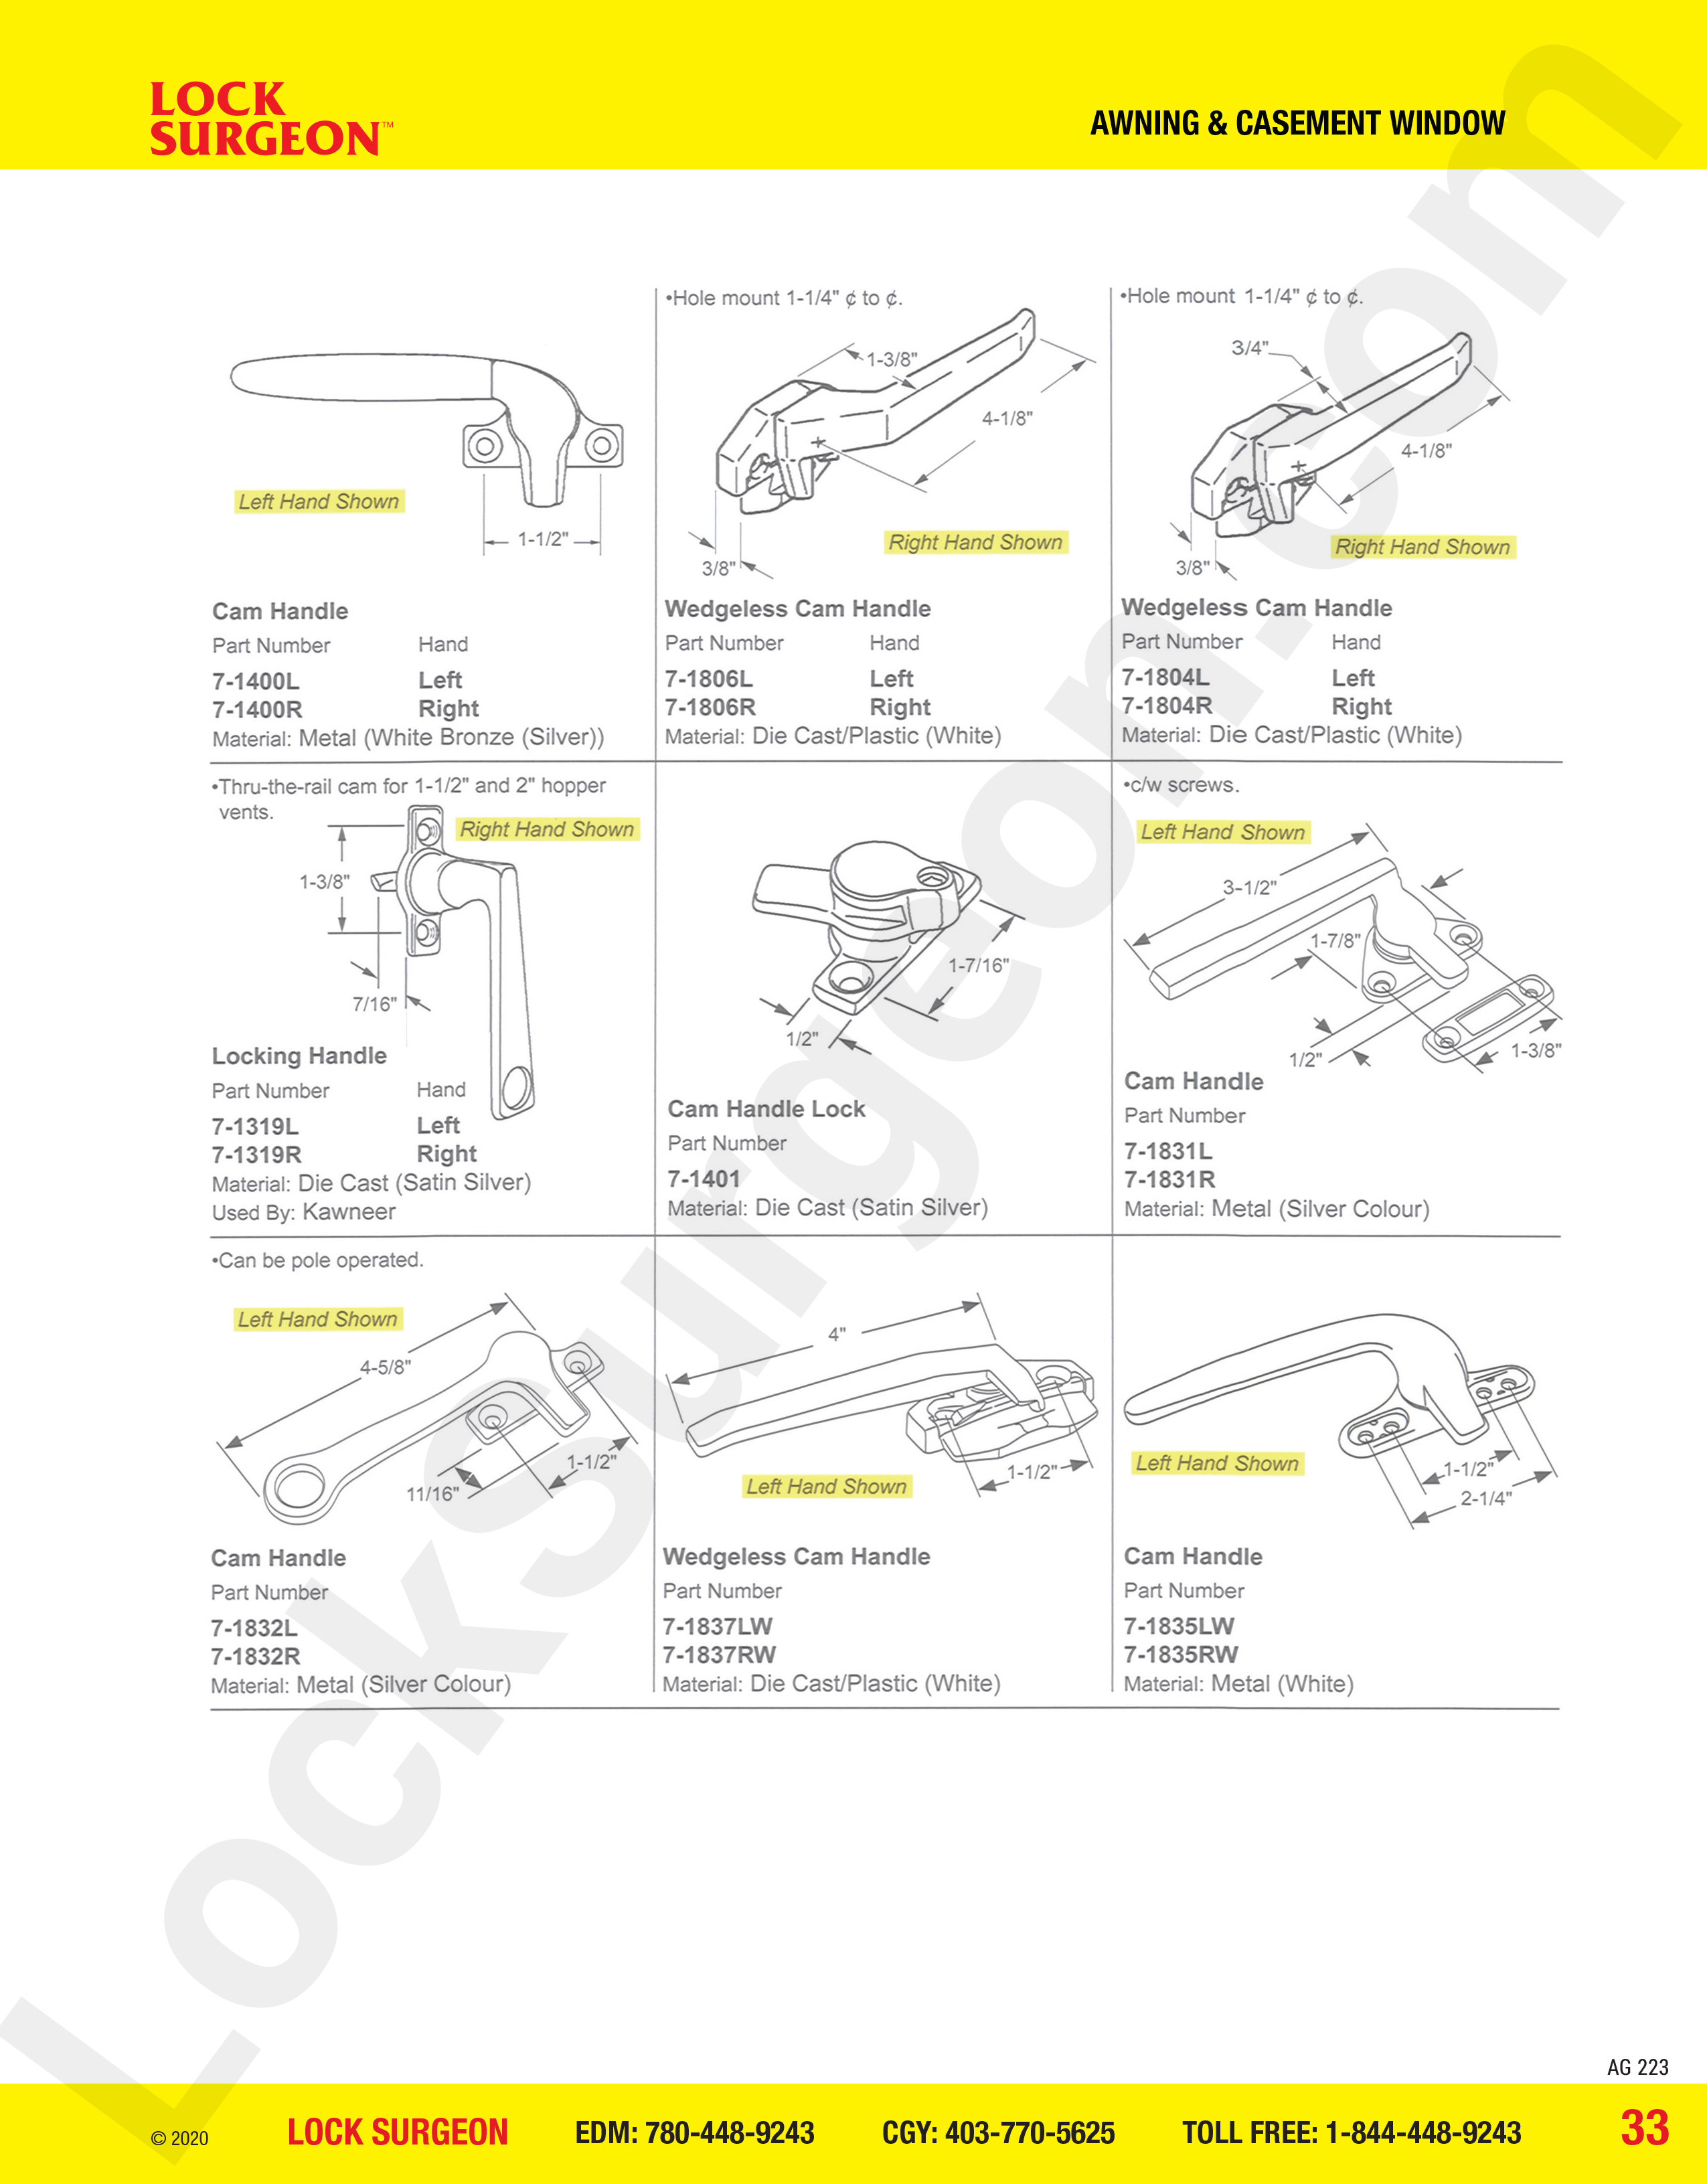 awning and casement window parts for cam handles and locks.